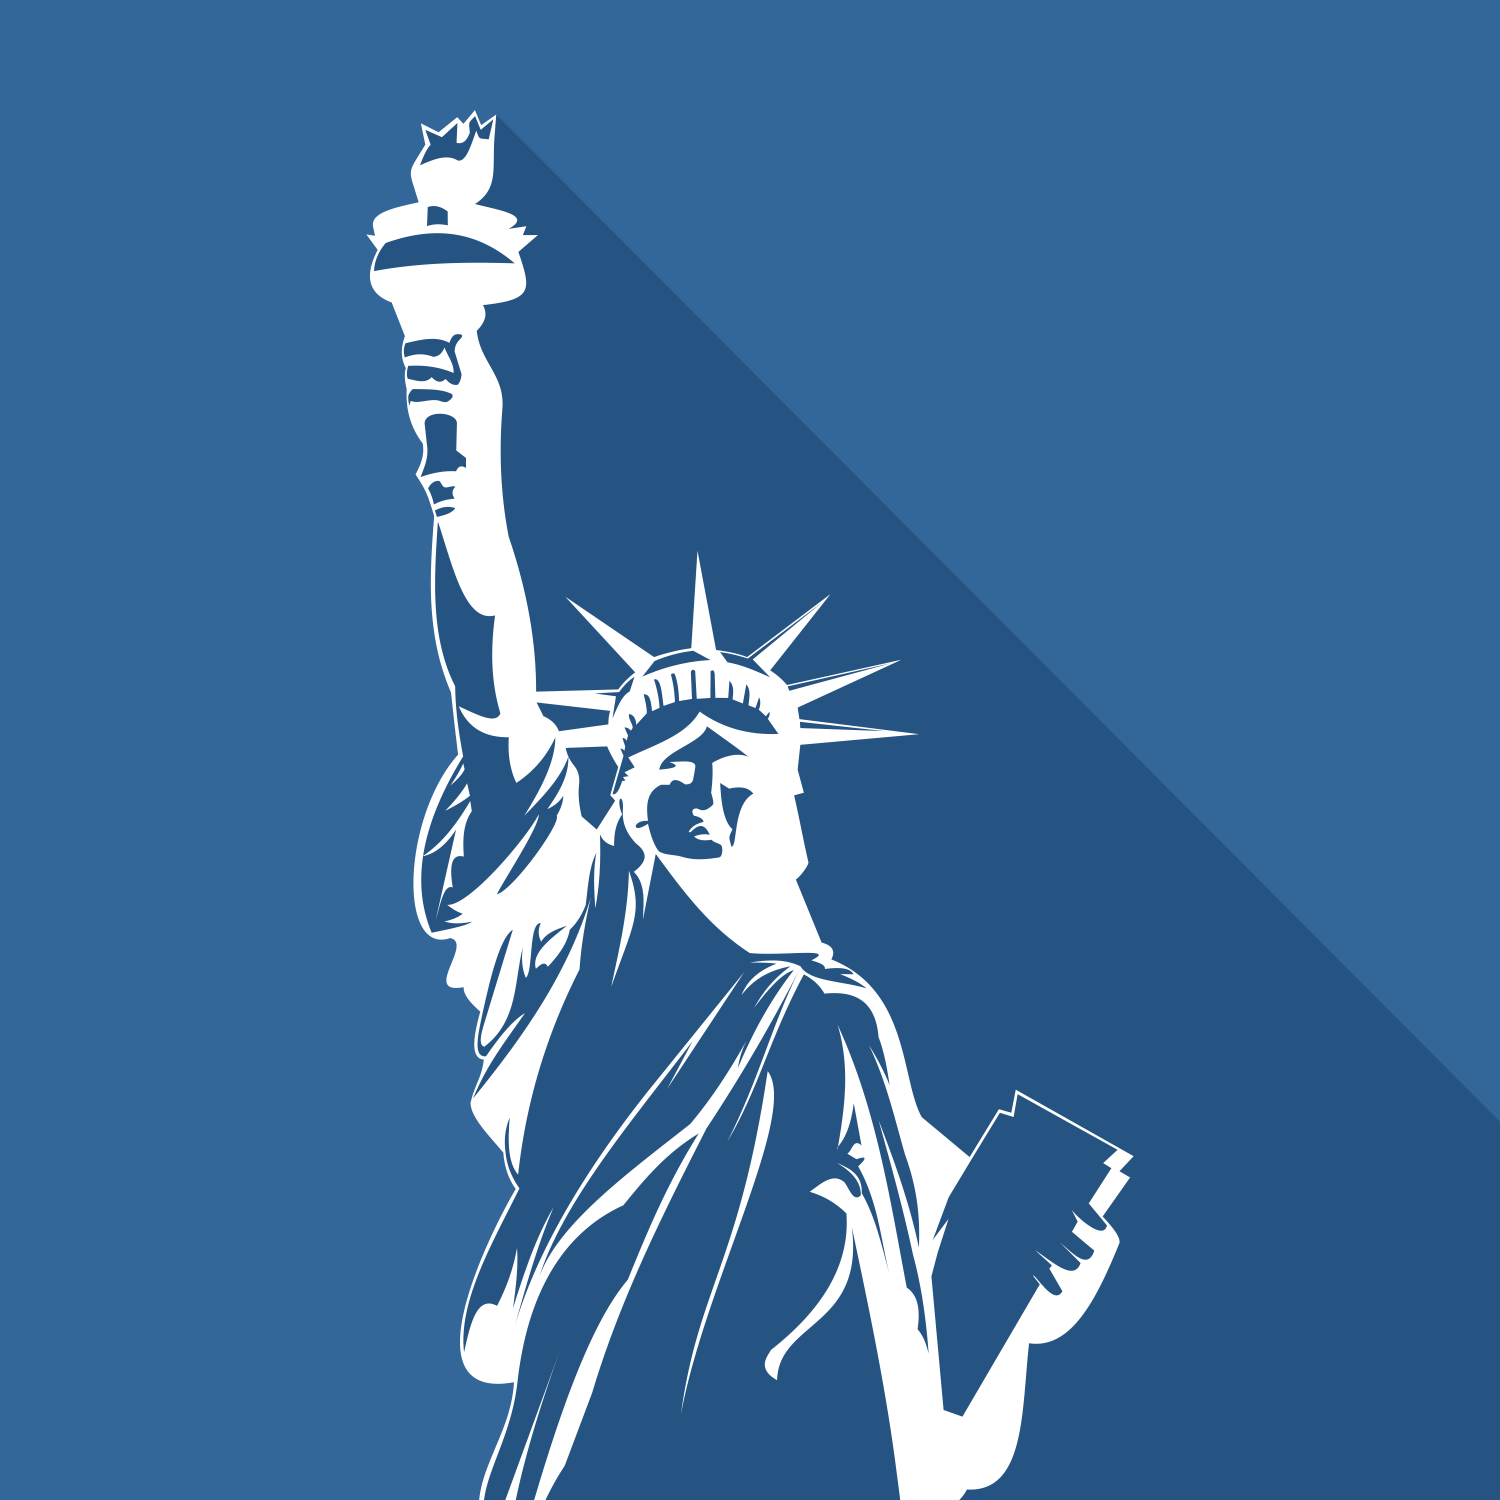 Statue Of Liberty Vector - www.inf-inet.com